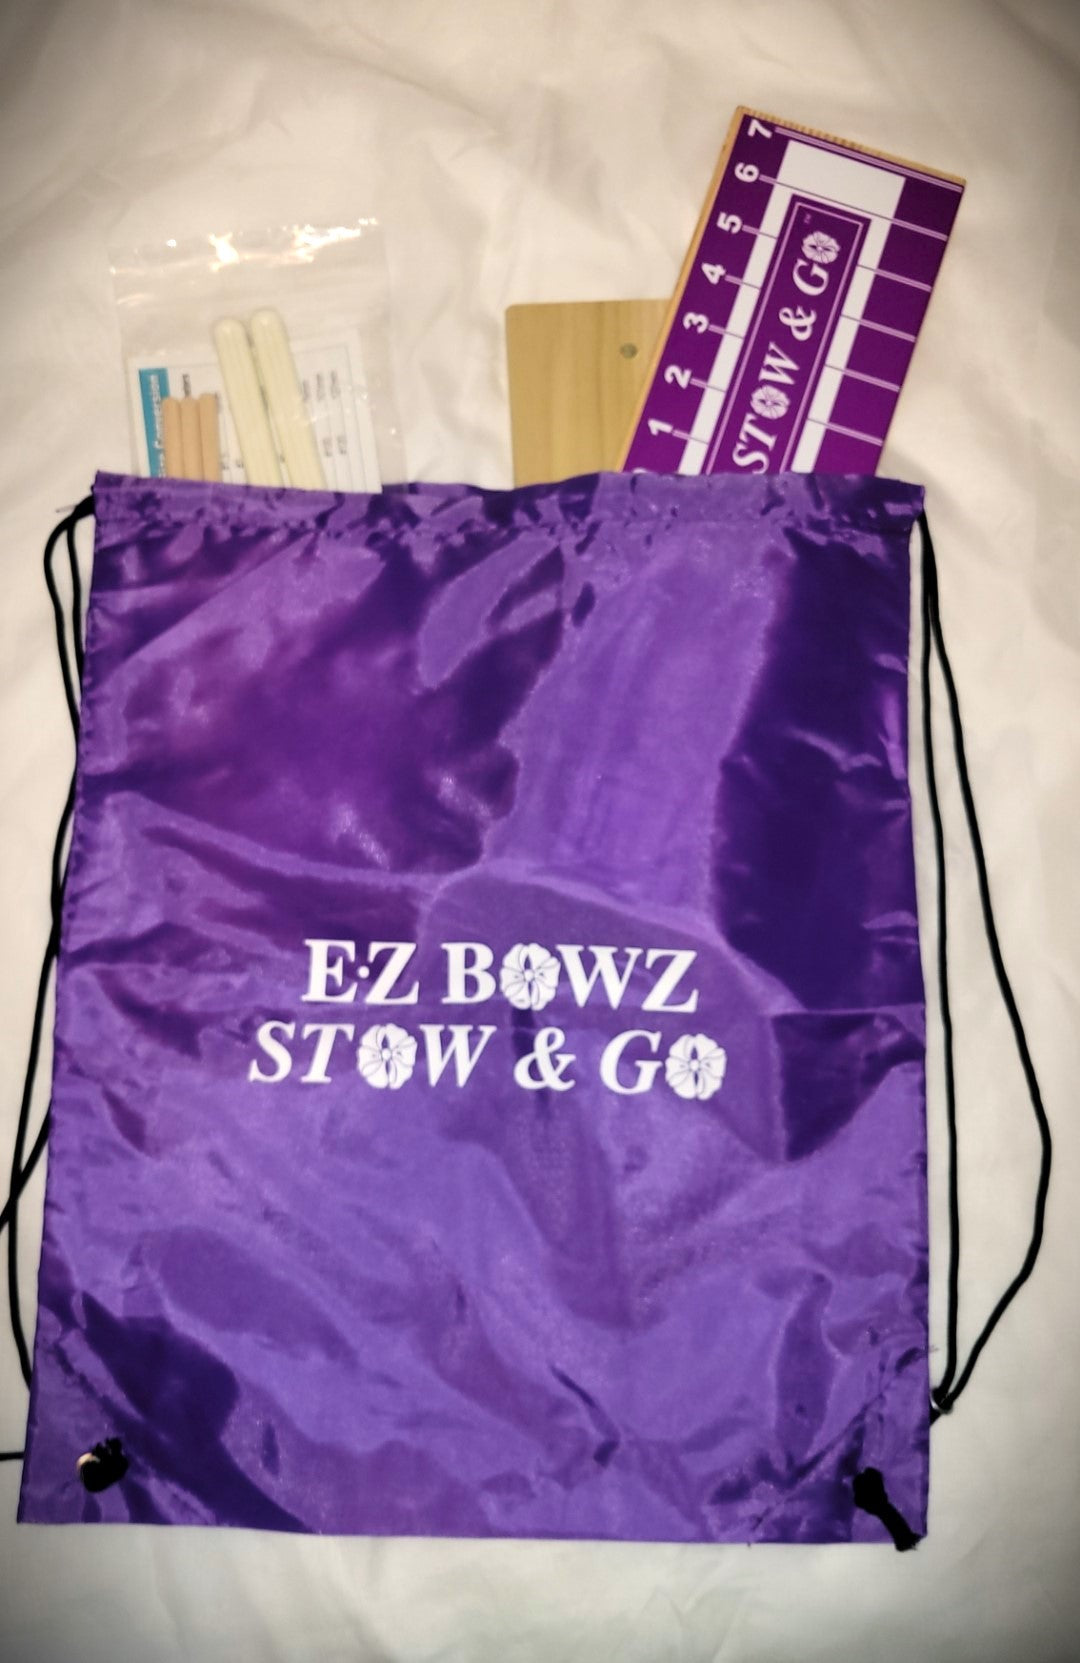 E-Z Bowz Stow & Go with matching Tote Bag Case Pack of 12